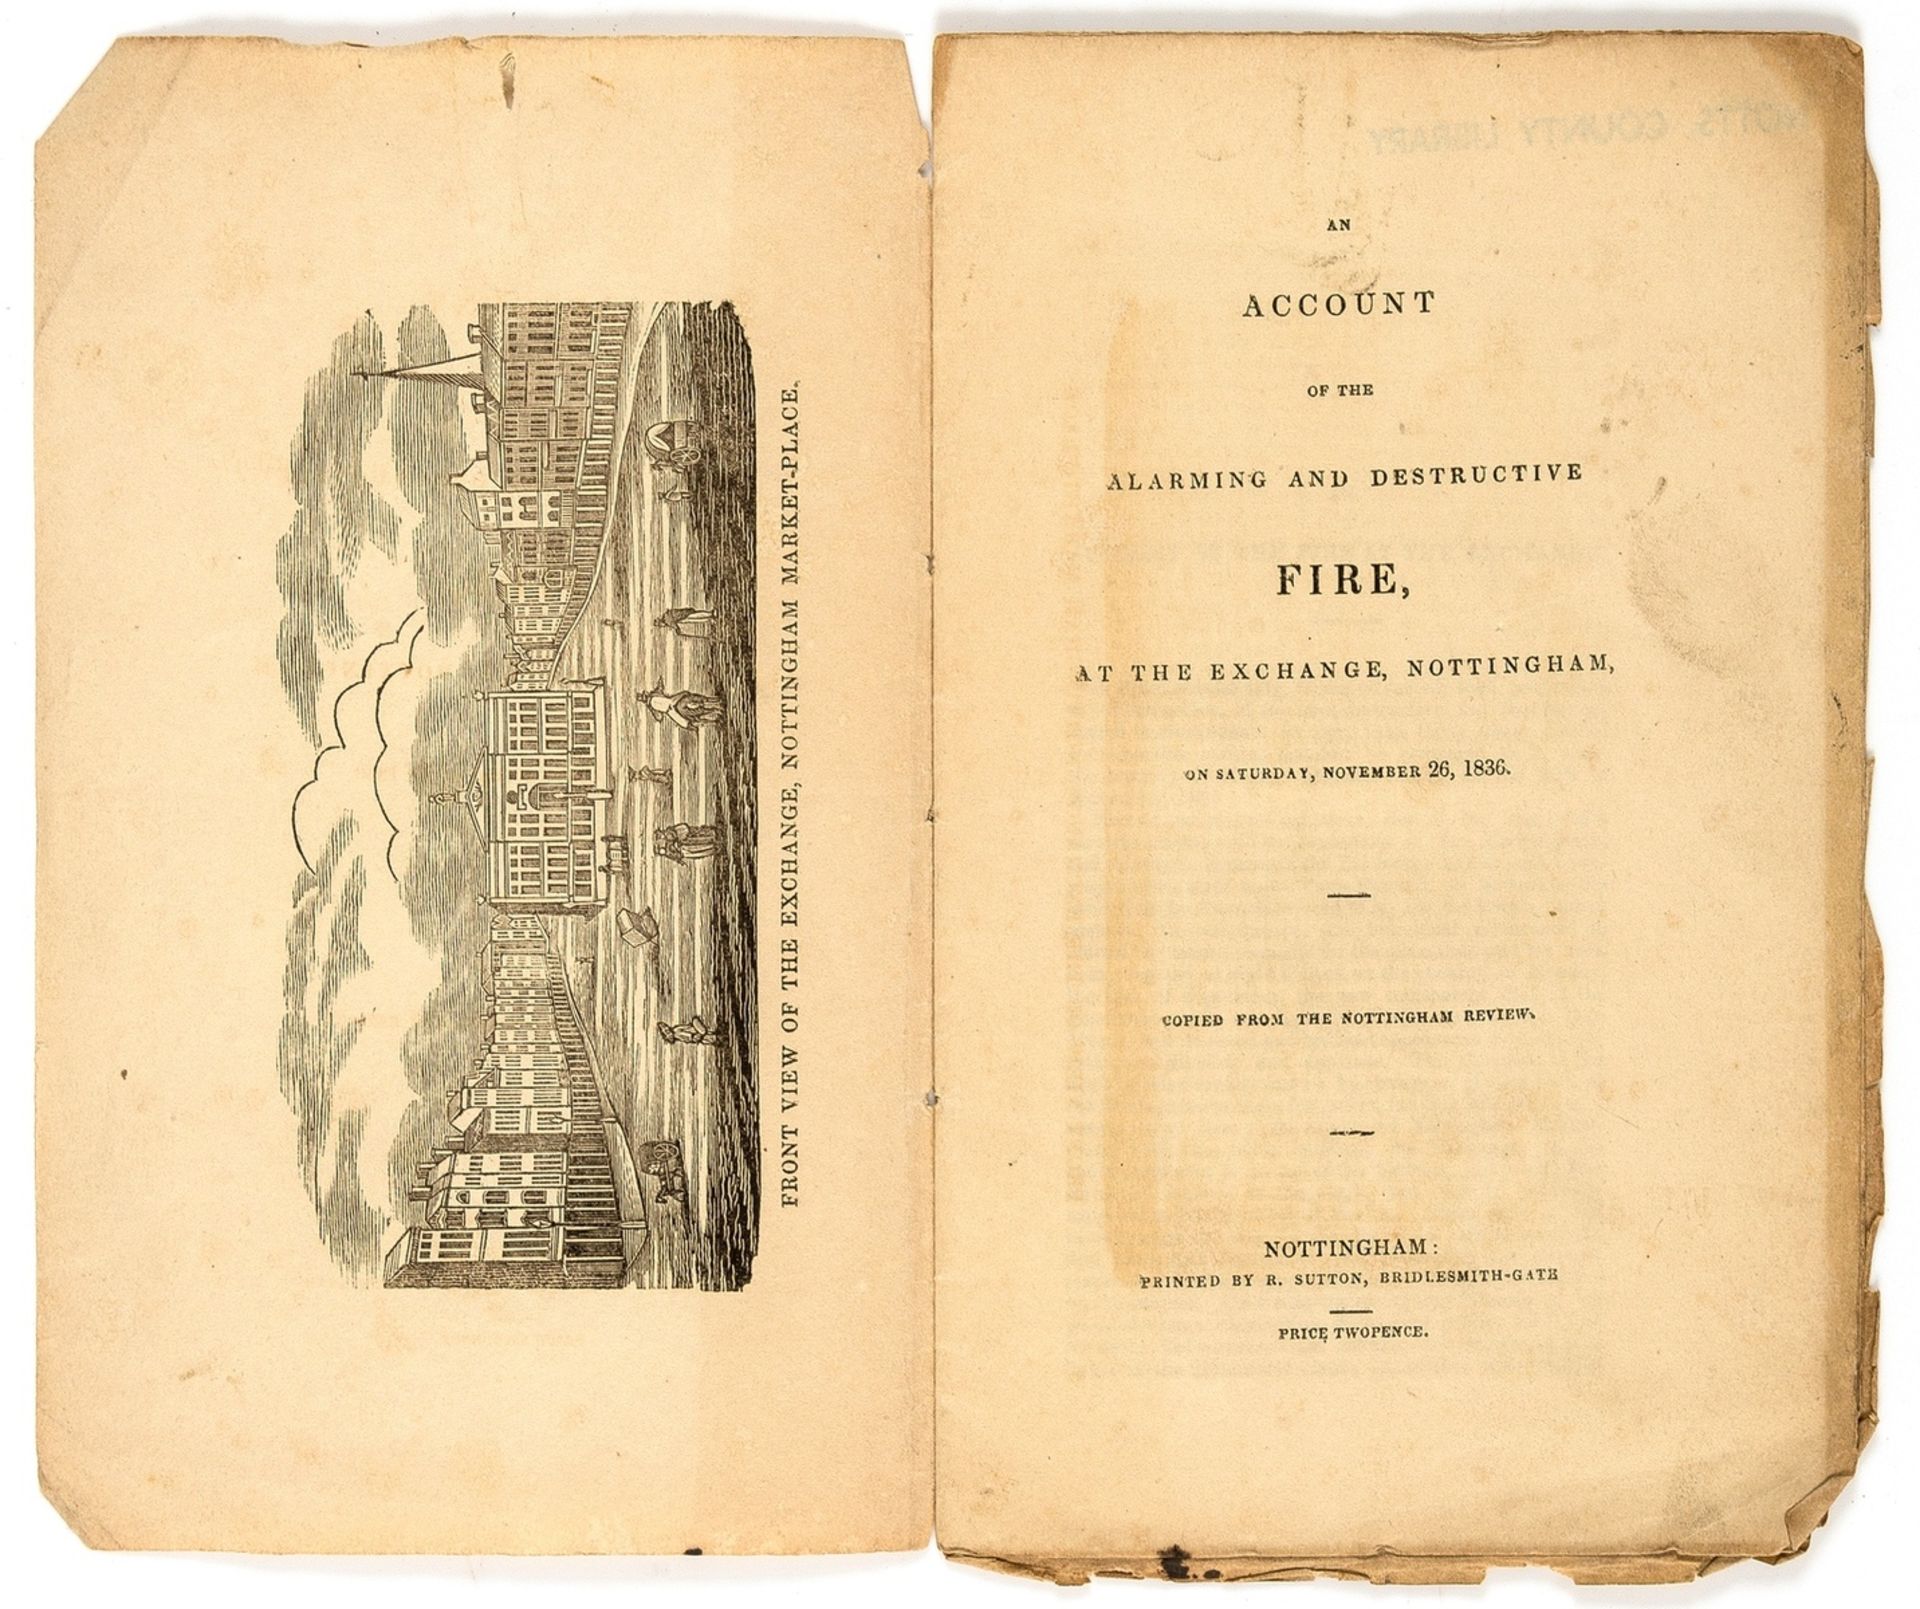 Nottingham.- Account (An) of the Alarming and Destructive Fire, at the Exchange, Nottingham, …